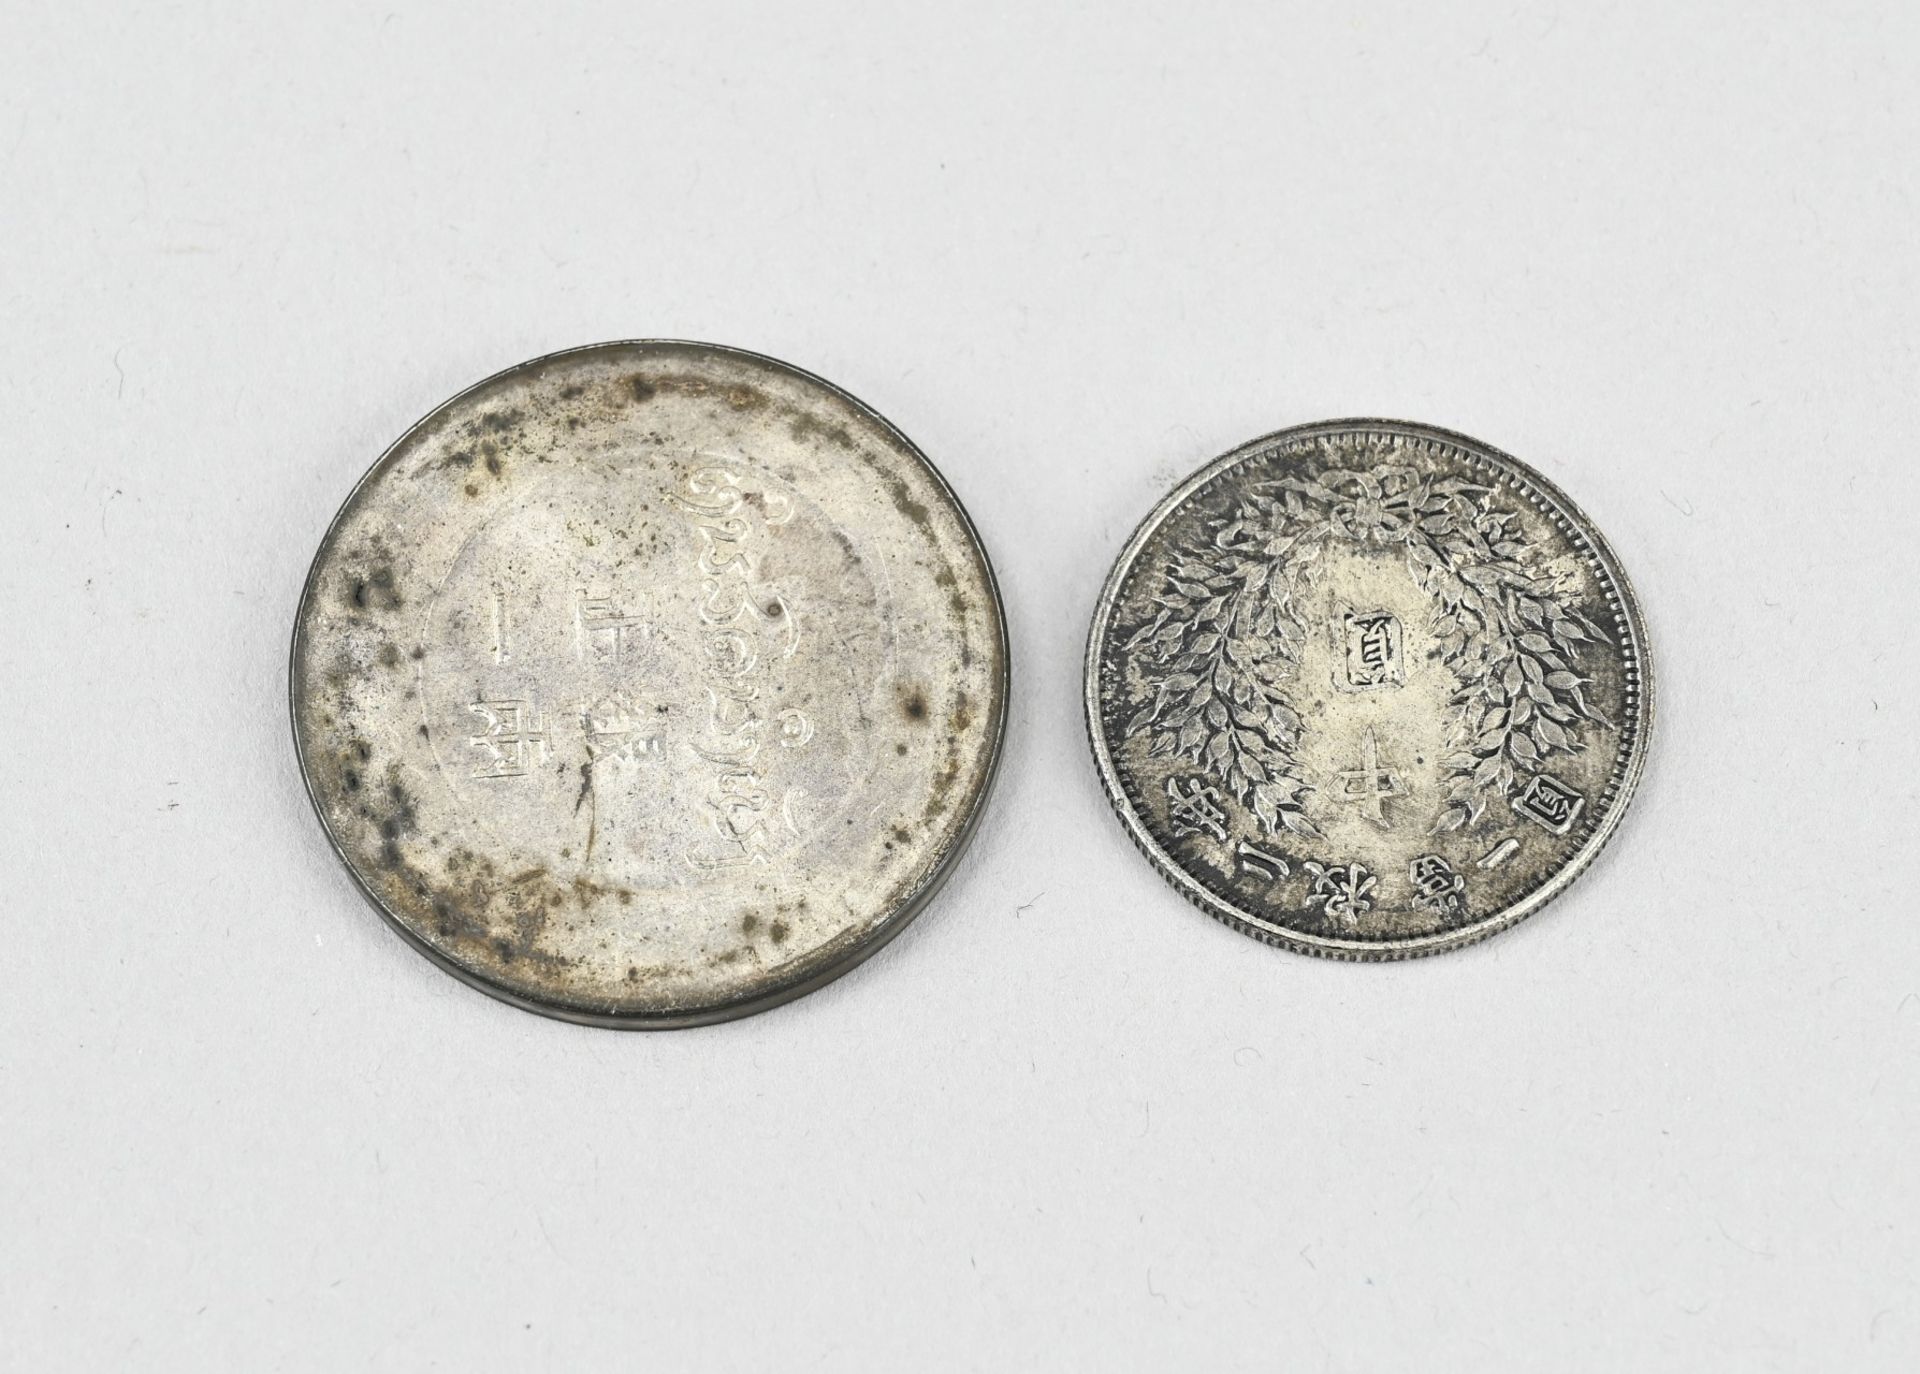 2x Chinese coin